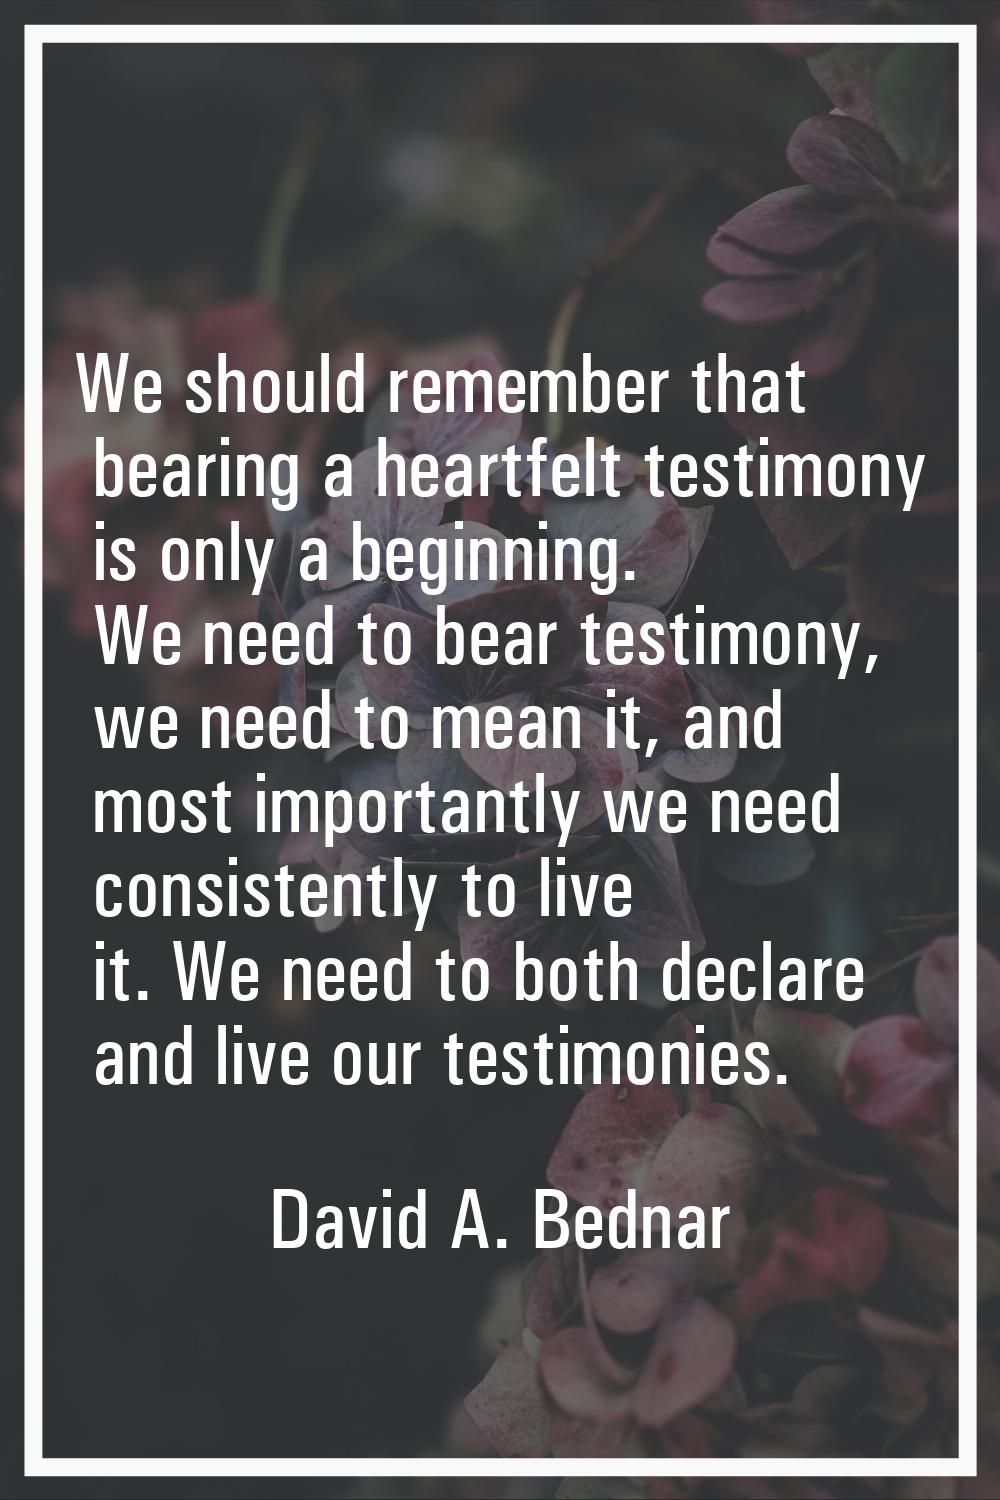 We should remember that bearing a heartfelt testimony is only a beginning. We need to bear testimon